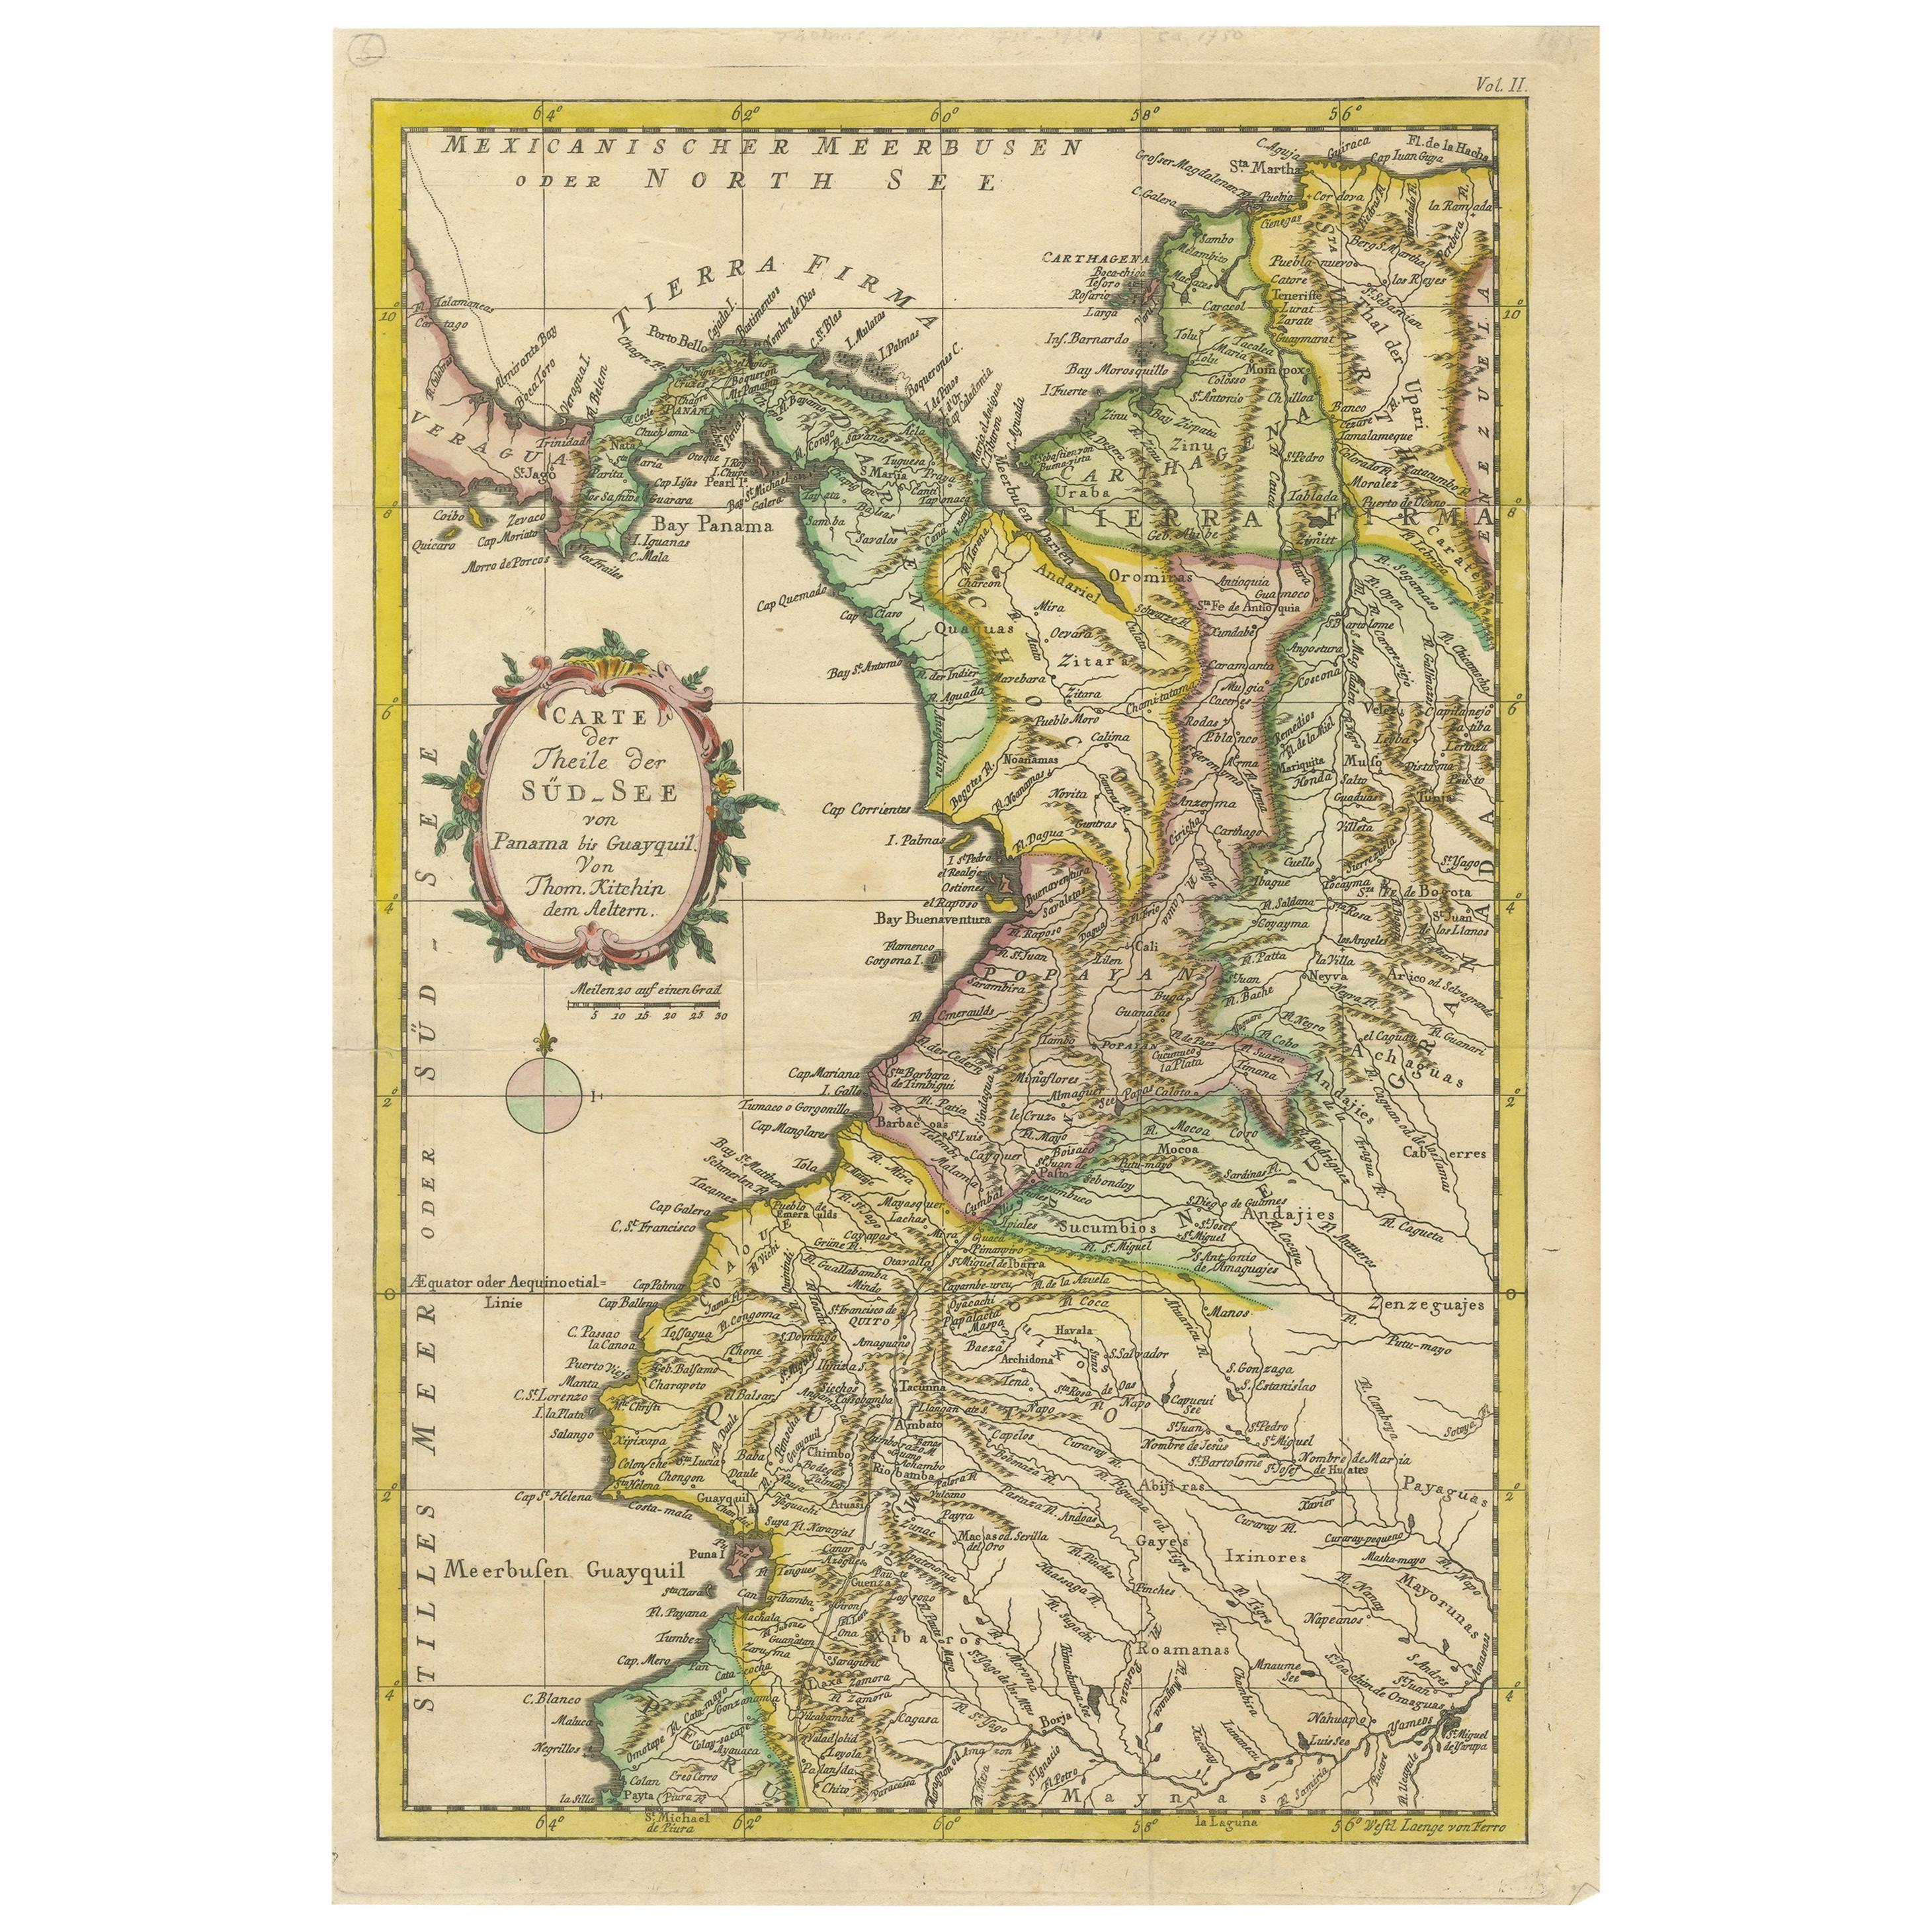 Antique Map of Part of South America by Kitchin, circa 1770